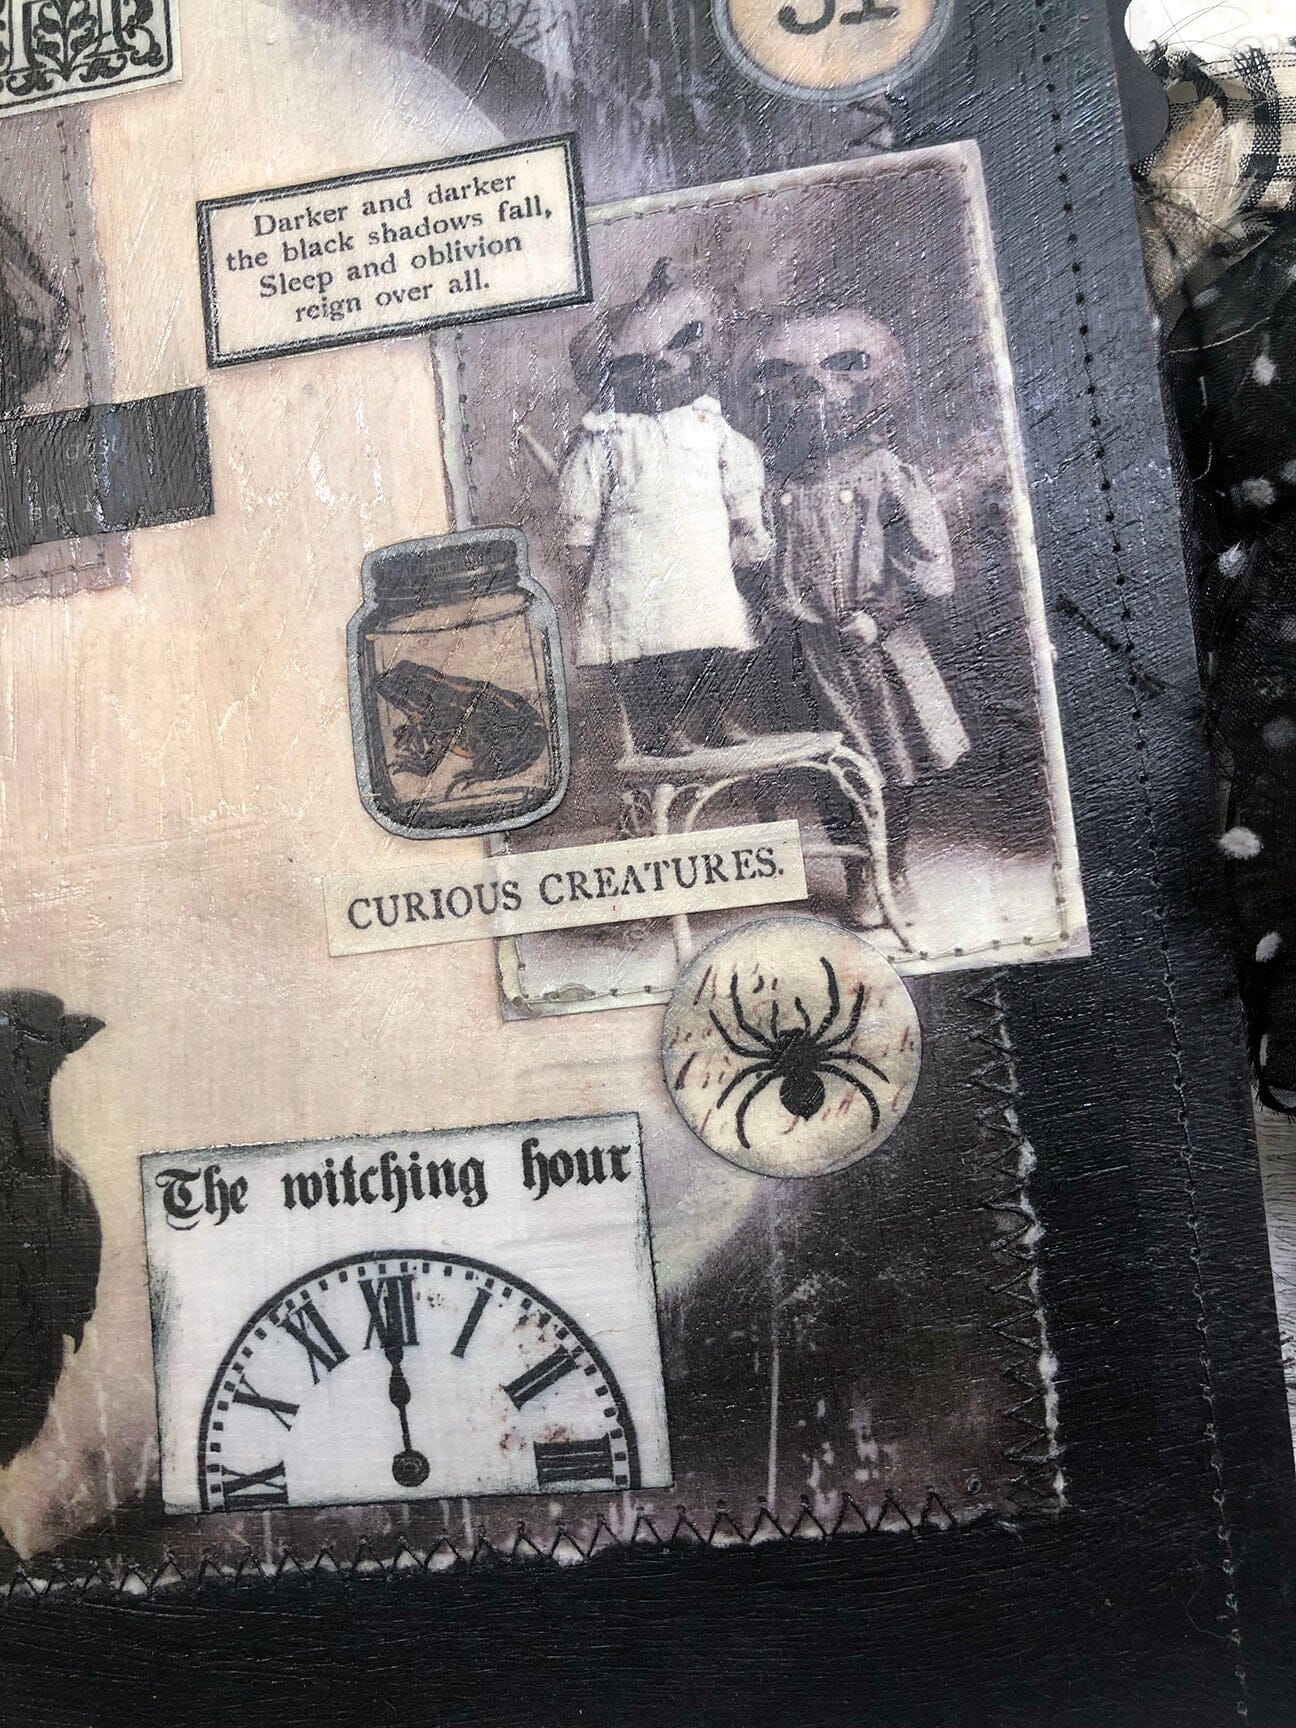 Haunted Souls Halloween Junk Journal with Ghosts & Ghouls Journal ila & alice 